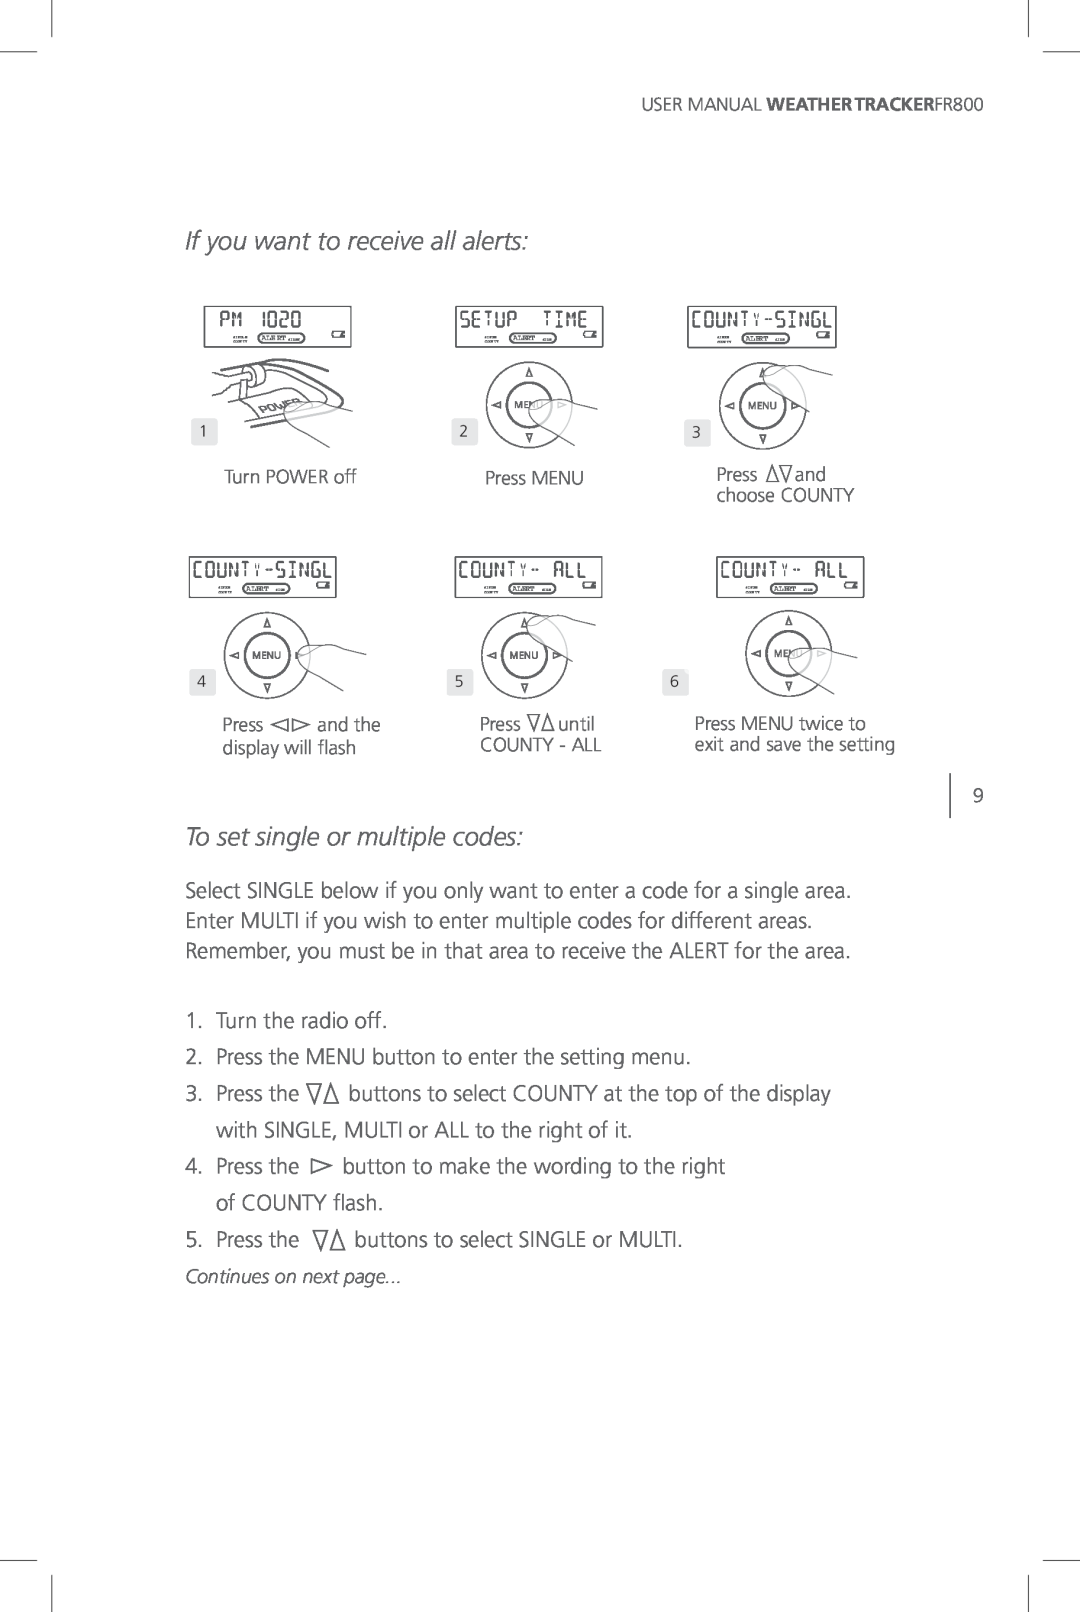 Eton FR800 user manual If you want to receive all alerts, To set single or multiple codes 